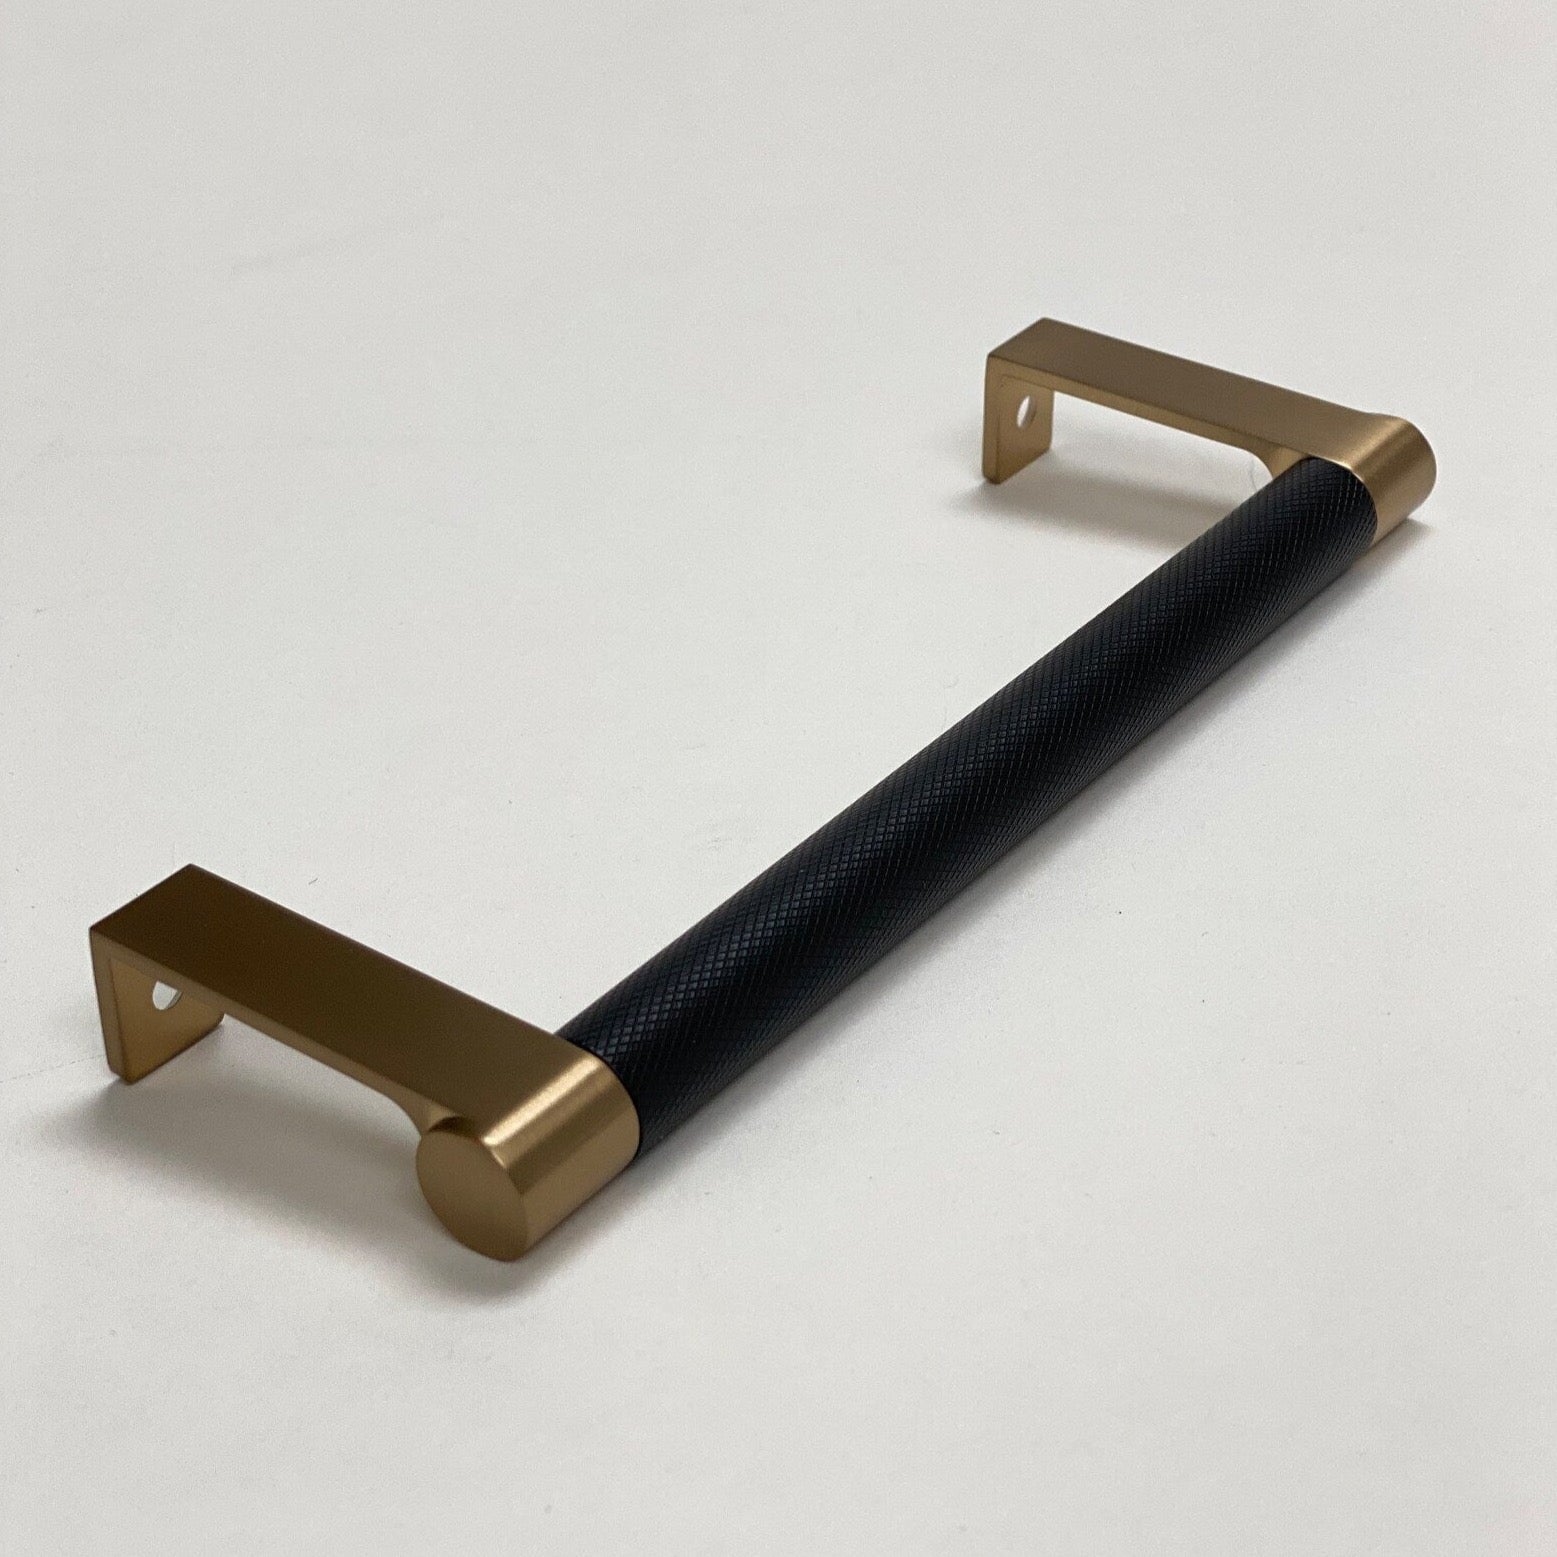 Champagne Bronze and Black "Converse" Knurled Edge Tab Drawer Pulls